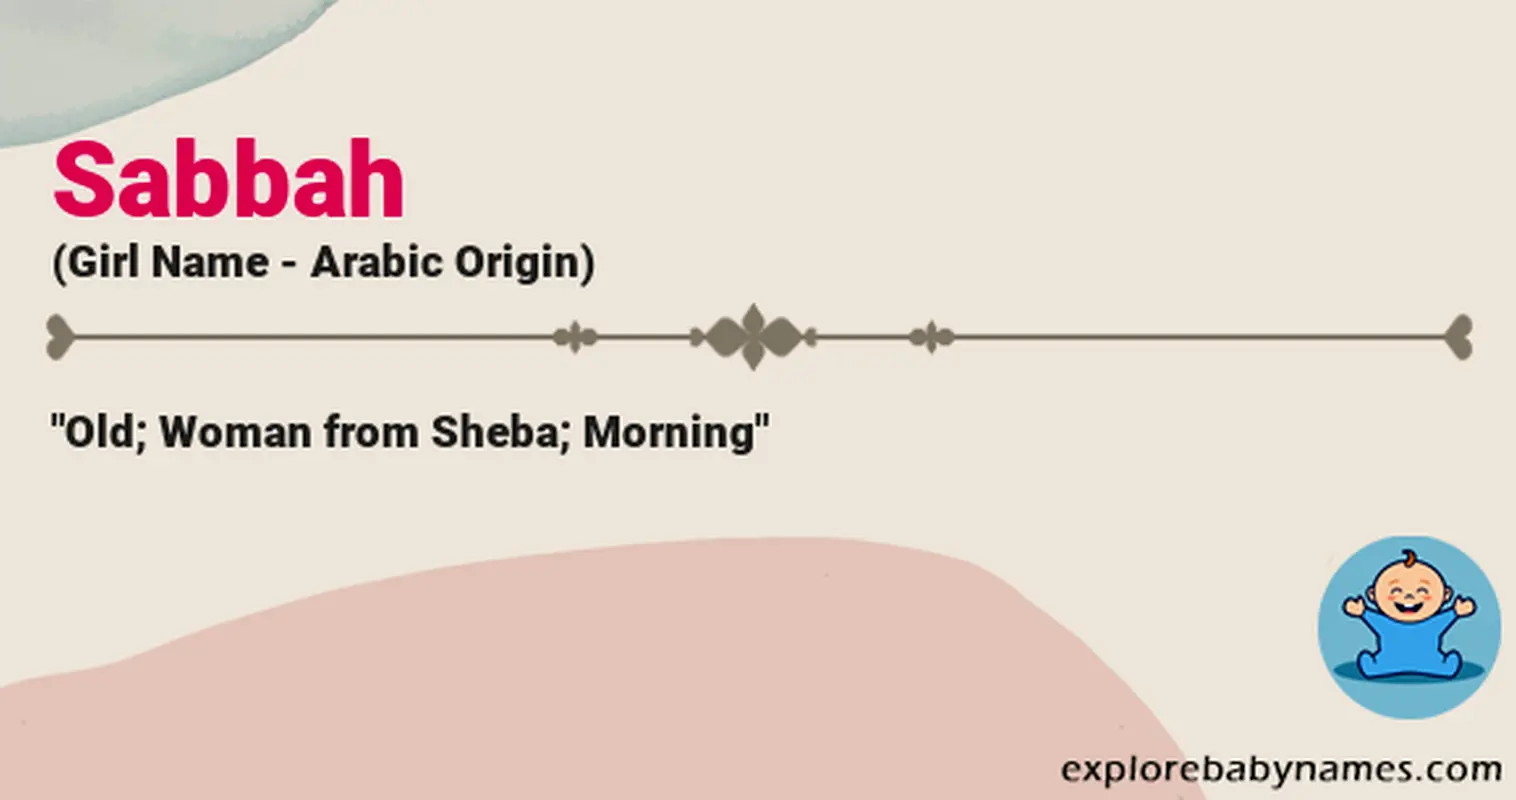 Meaning of Sabbah